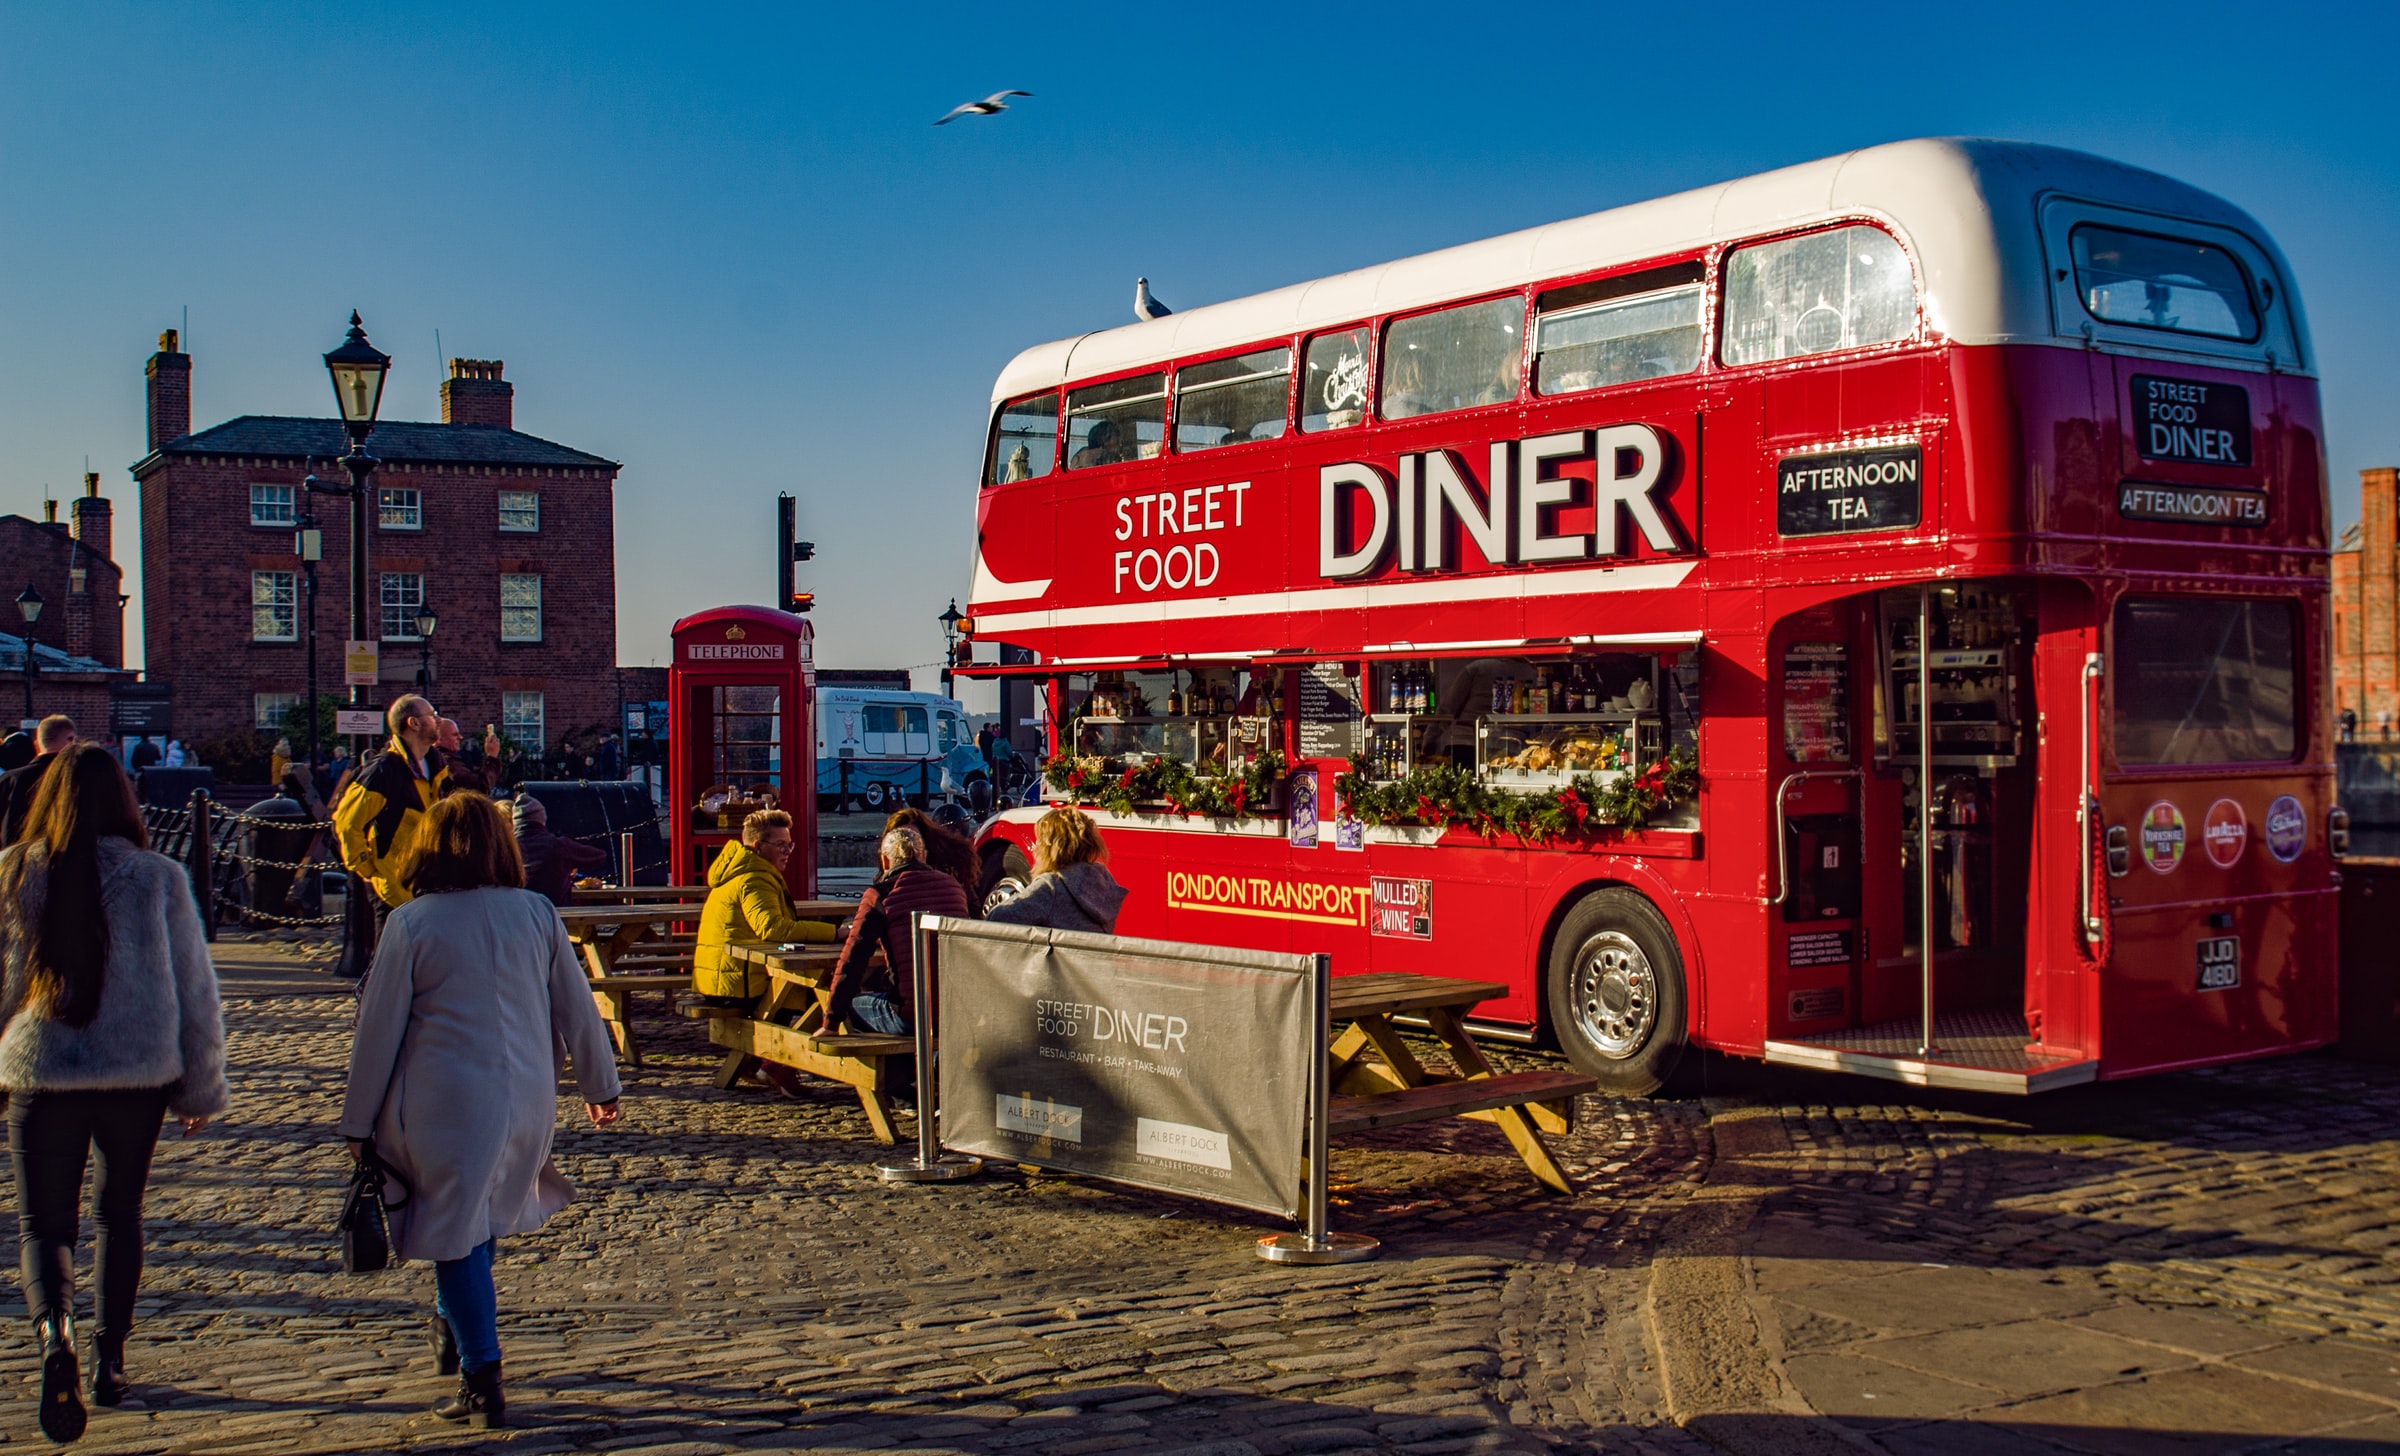 catering bus - image from unsplash